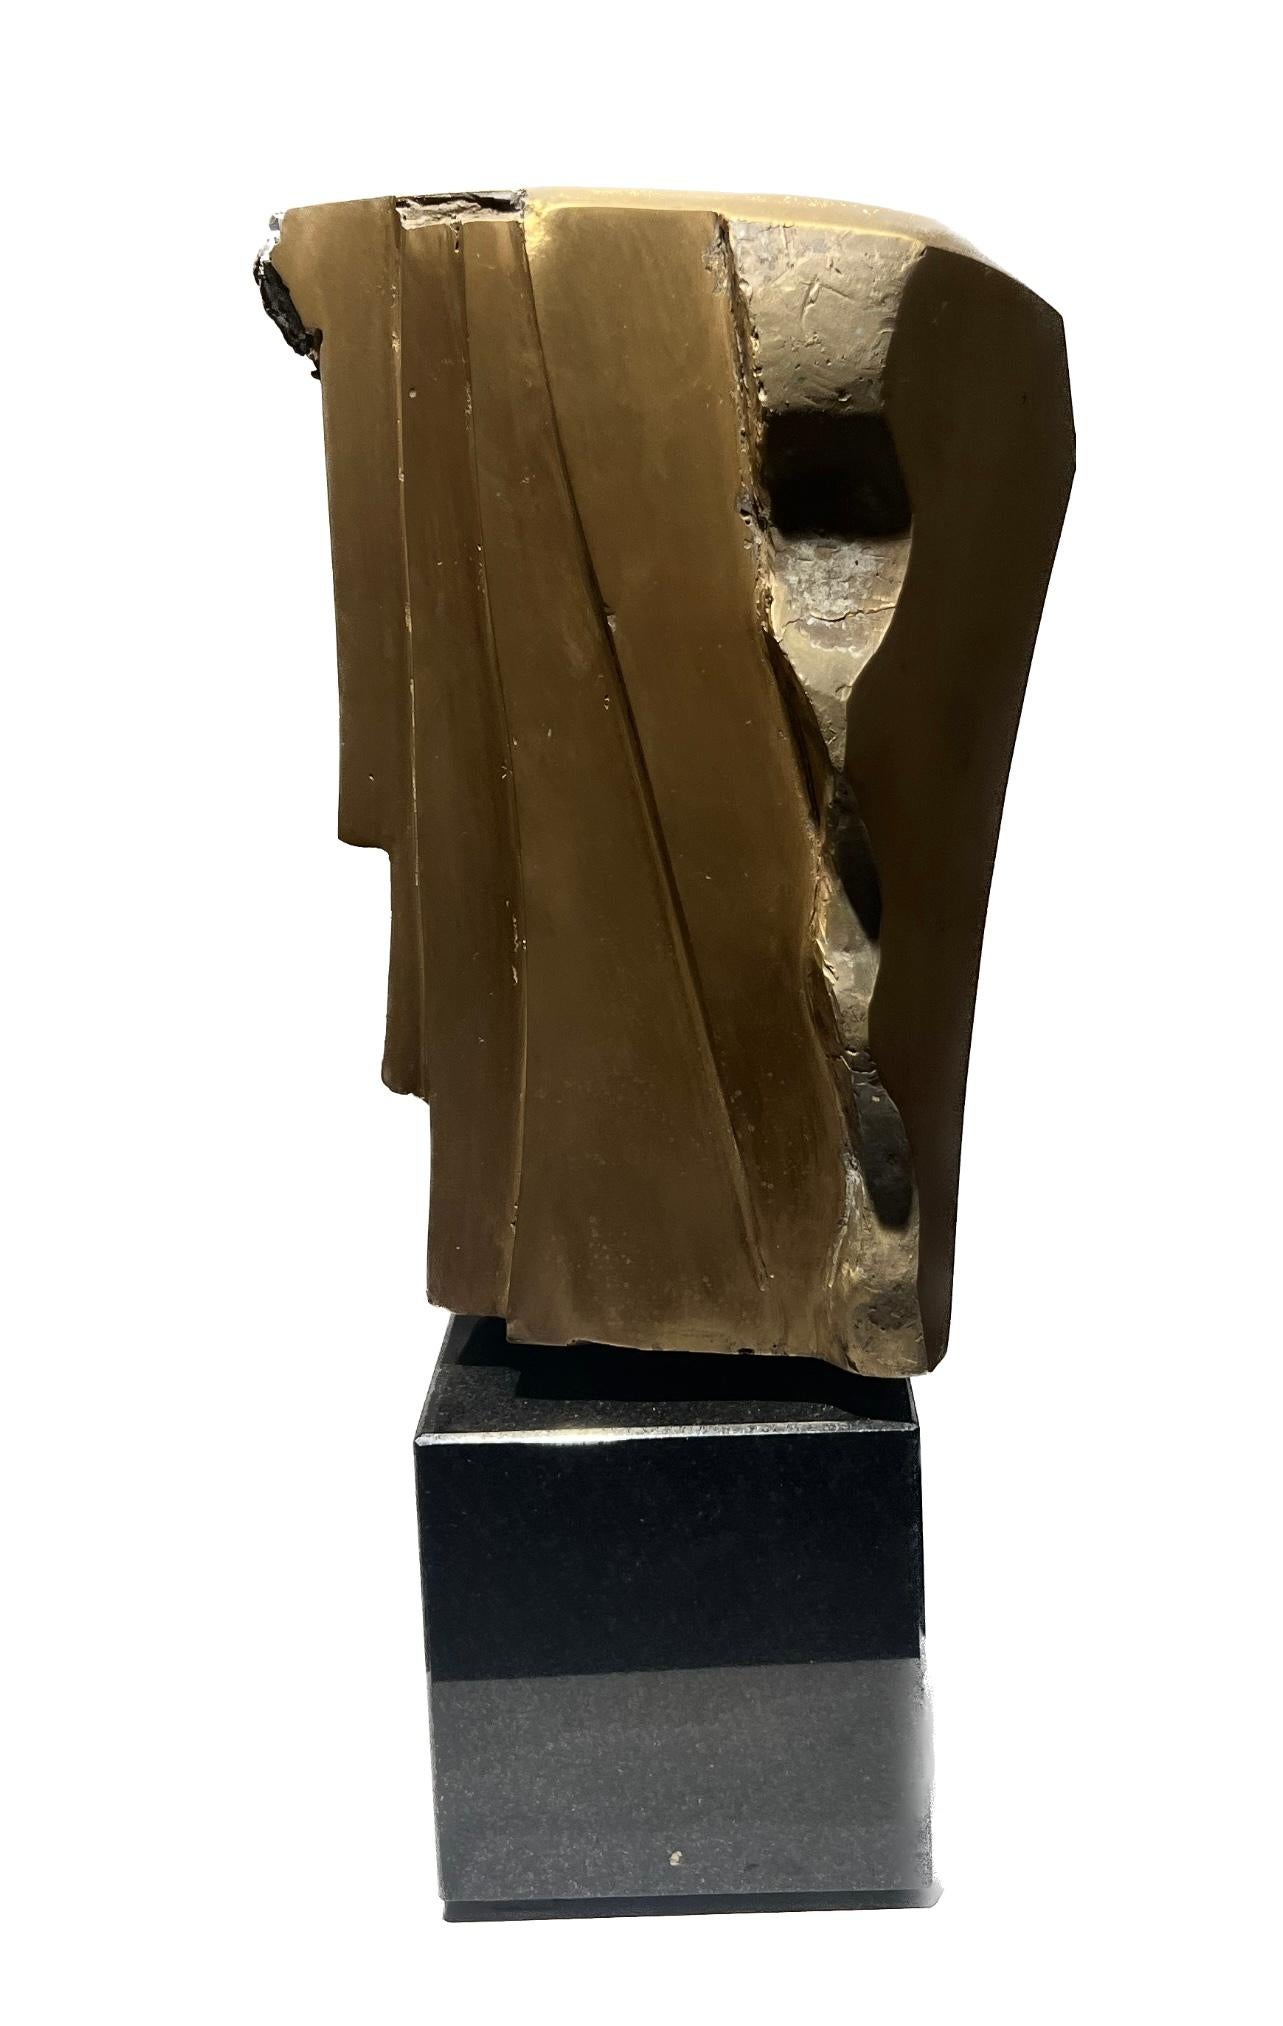 Little Abstract Head no. 10 Bronze Sculpture Polished Limited Edition For Sale 2